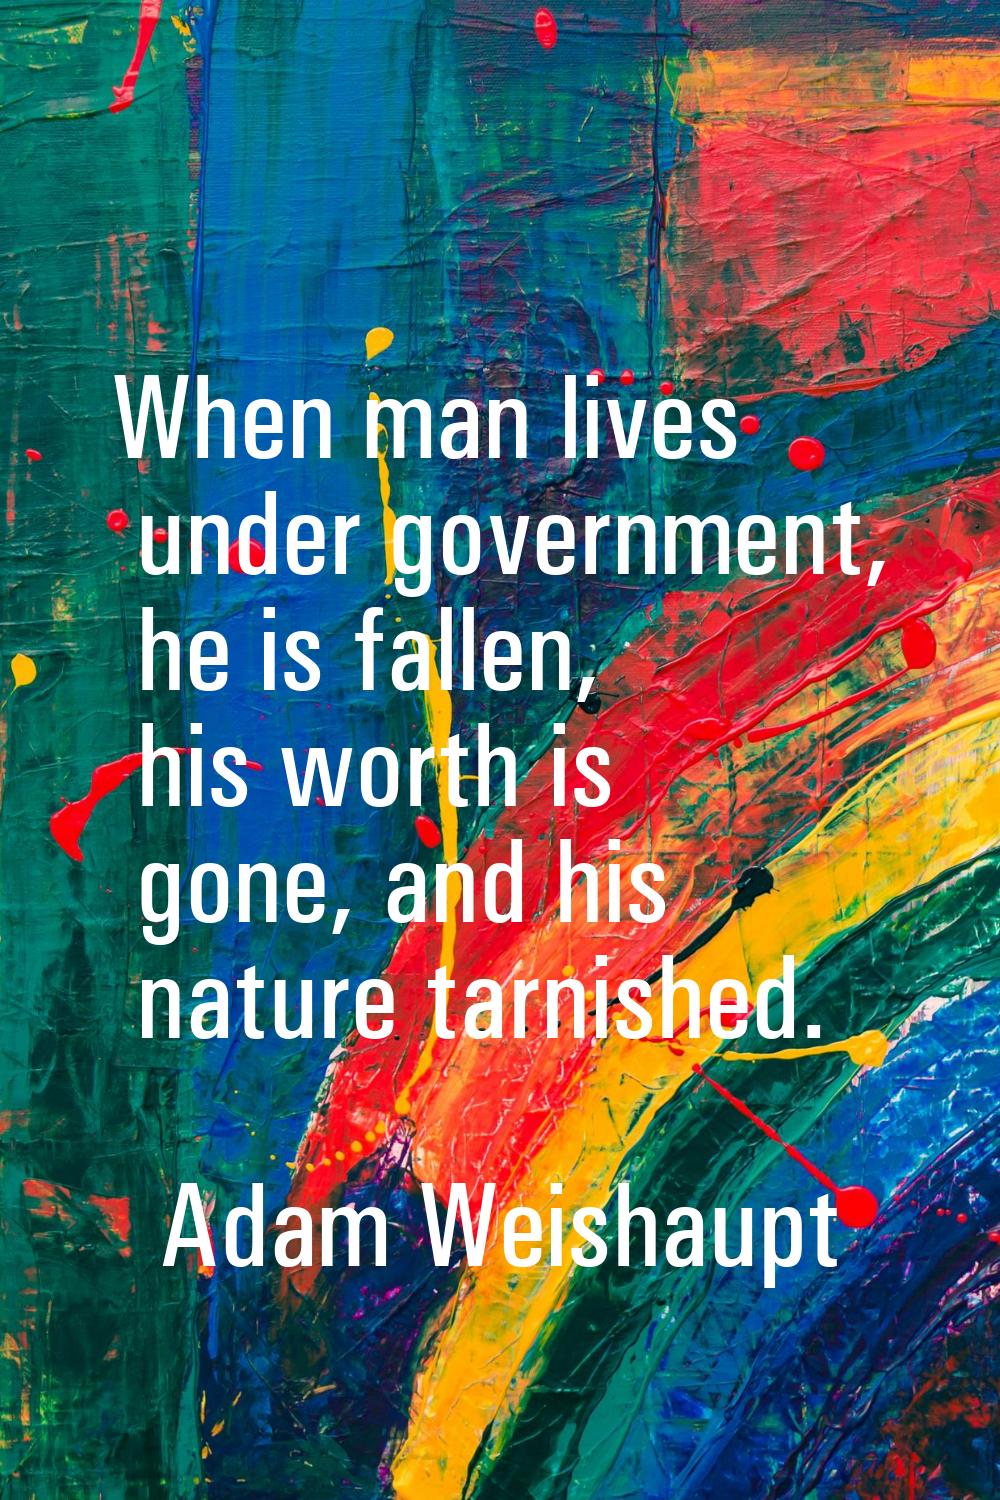 When man lives under government, he is fallen, his worth is gone, and his nature tarnished.